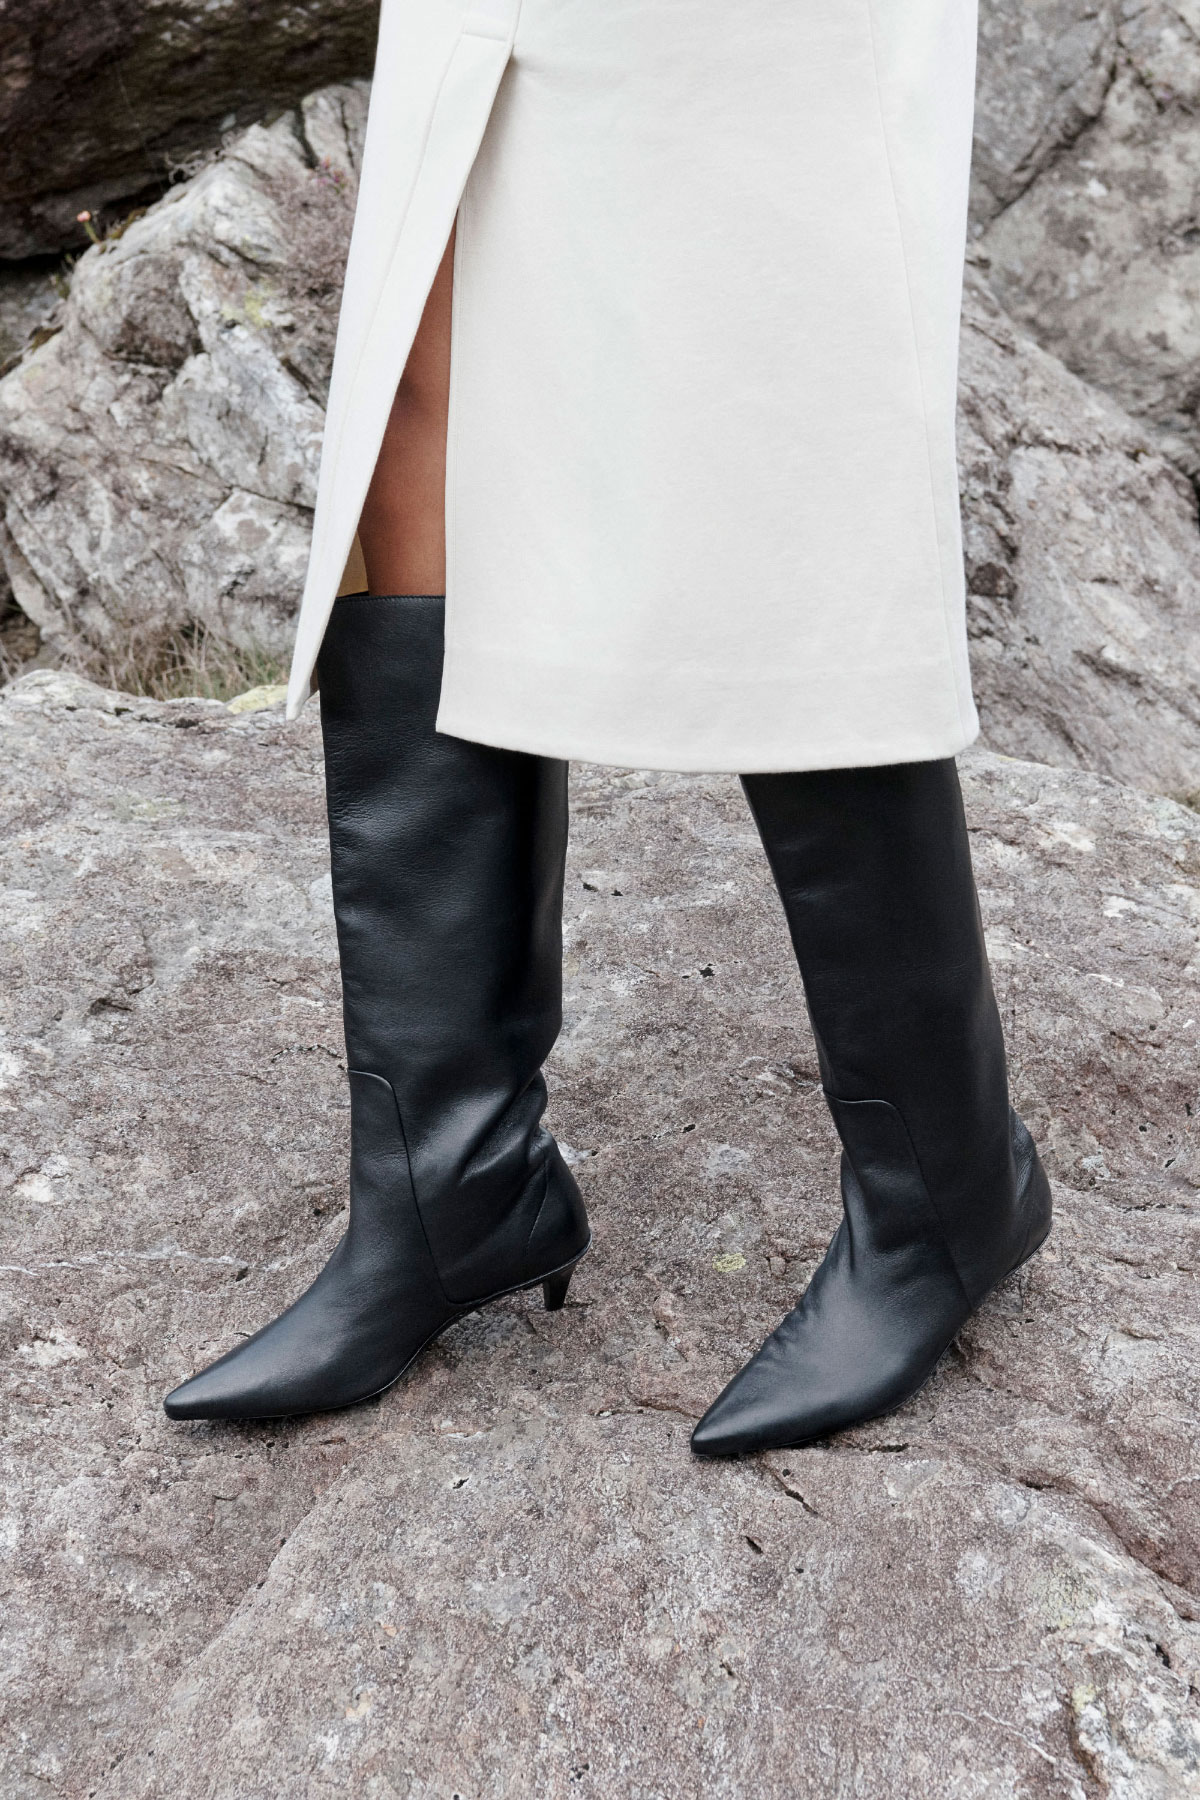 Boots for the season | Designed to complete any outfit, our new collection of boots will see you through the months ahead. ​ Shop boots: festivalwalk